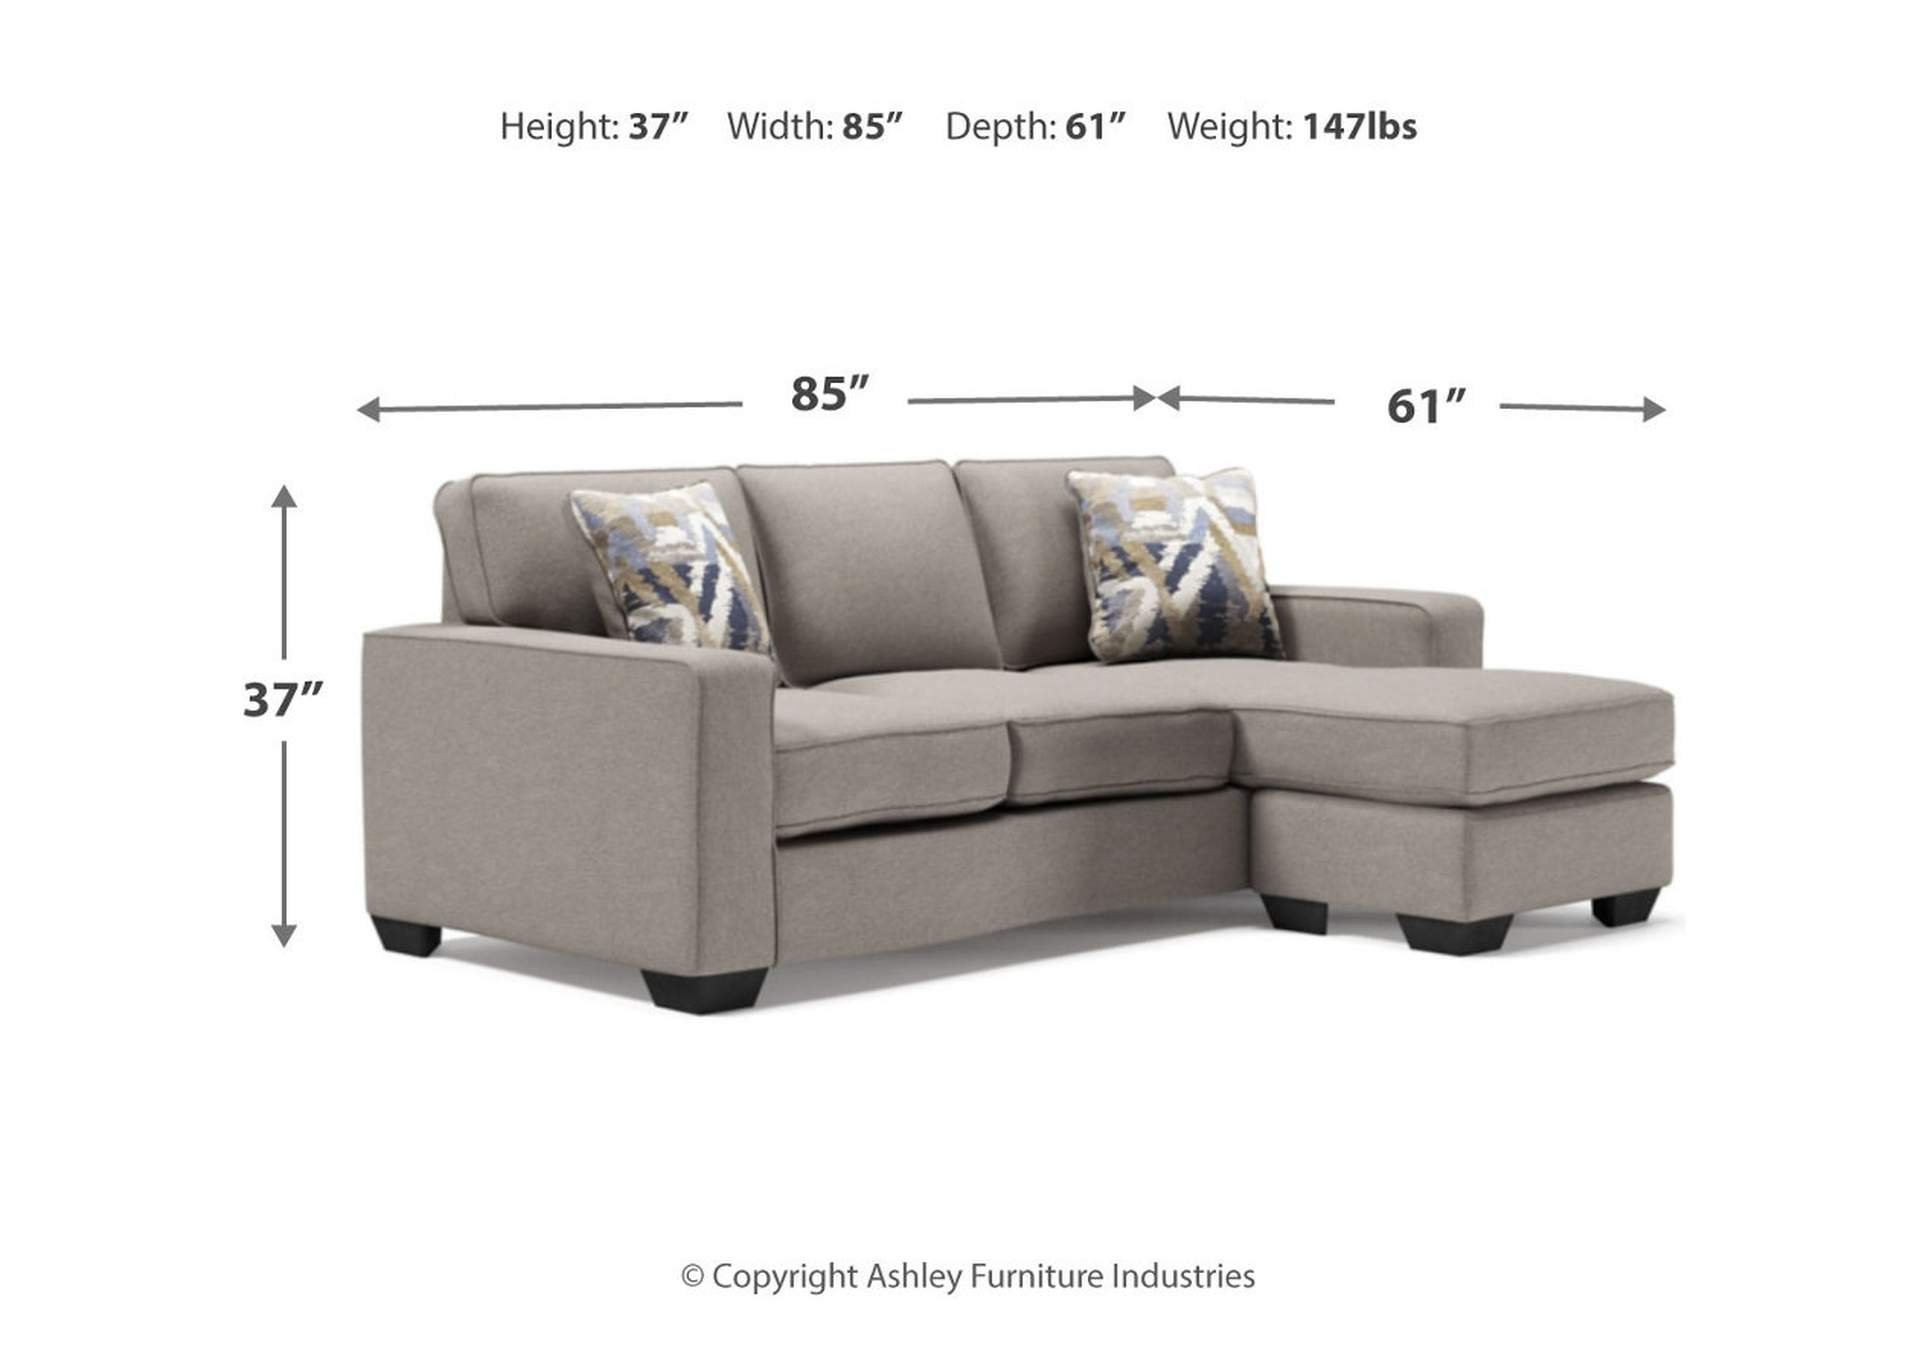 Greaves Sofa Chaise,Signature Design By Ashley